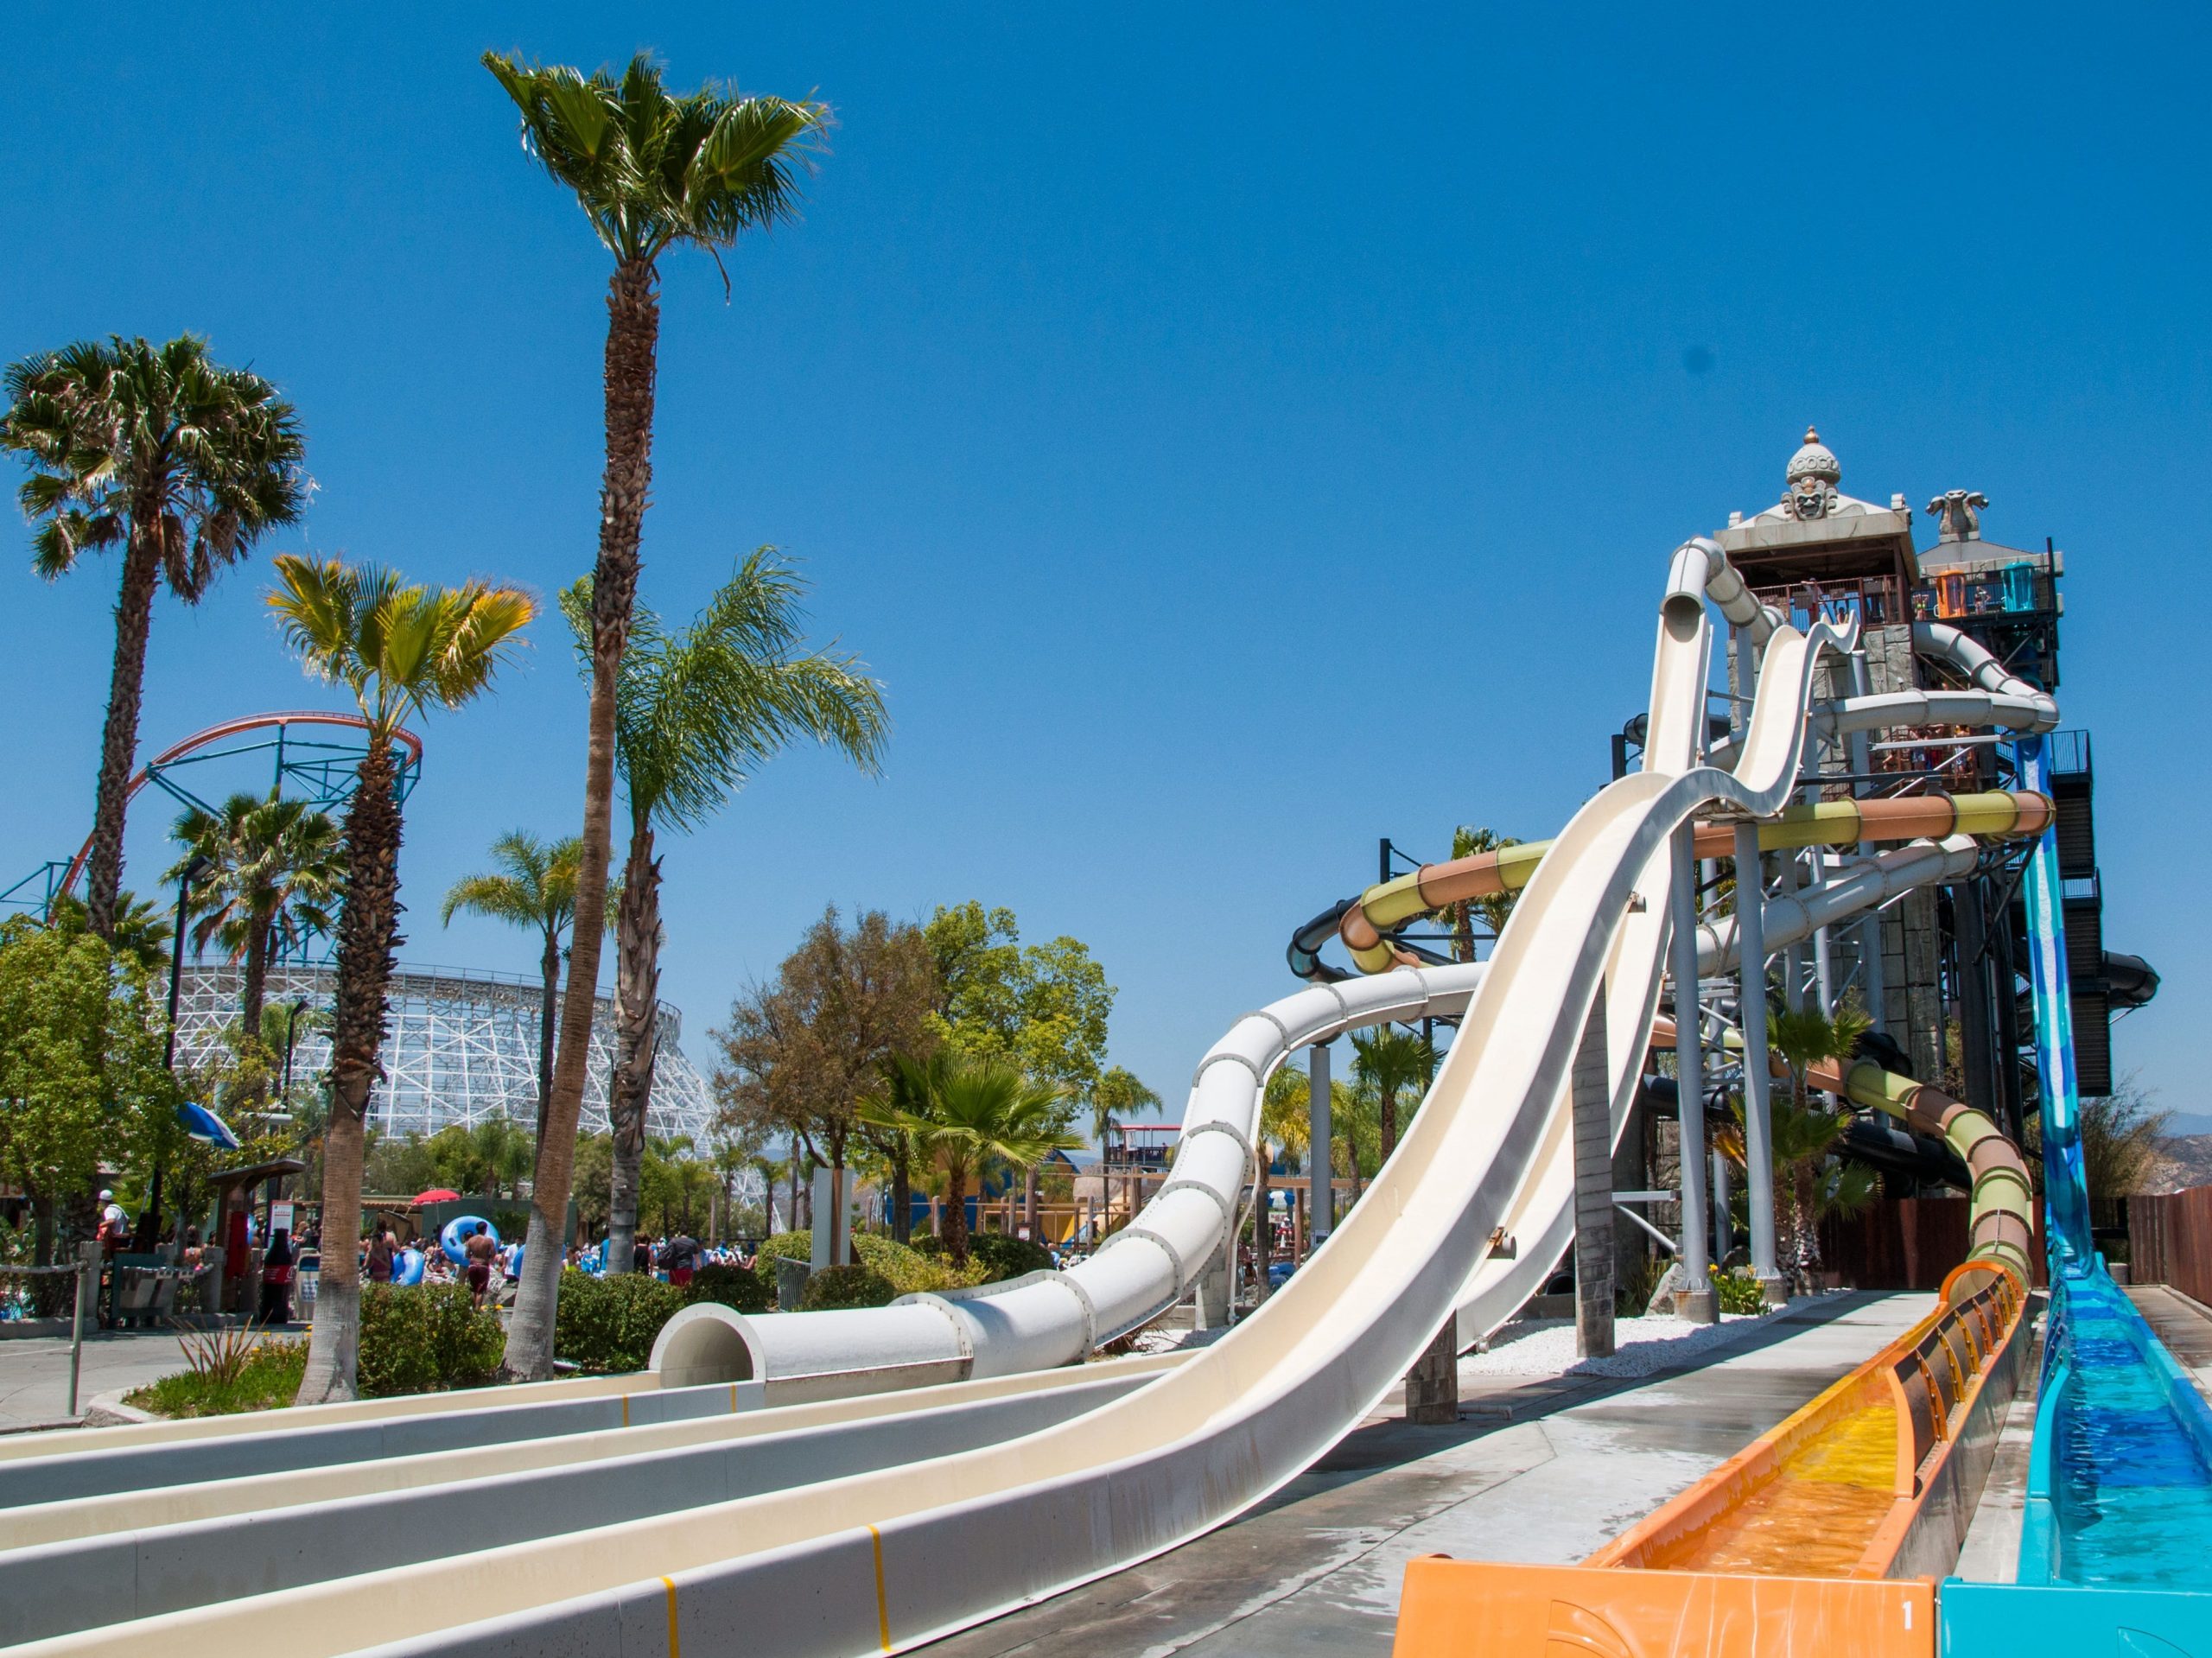 Six Flags Hurricane Harbor water slides and palm trees.